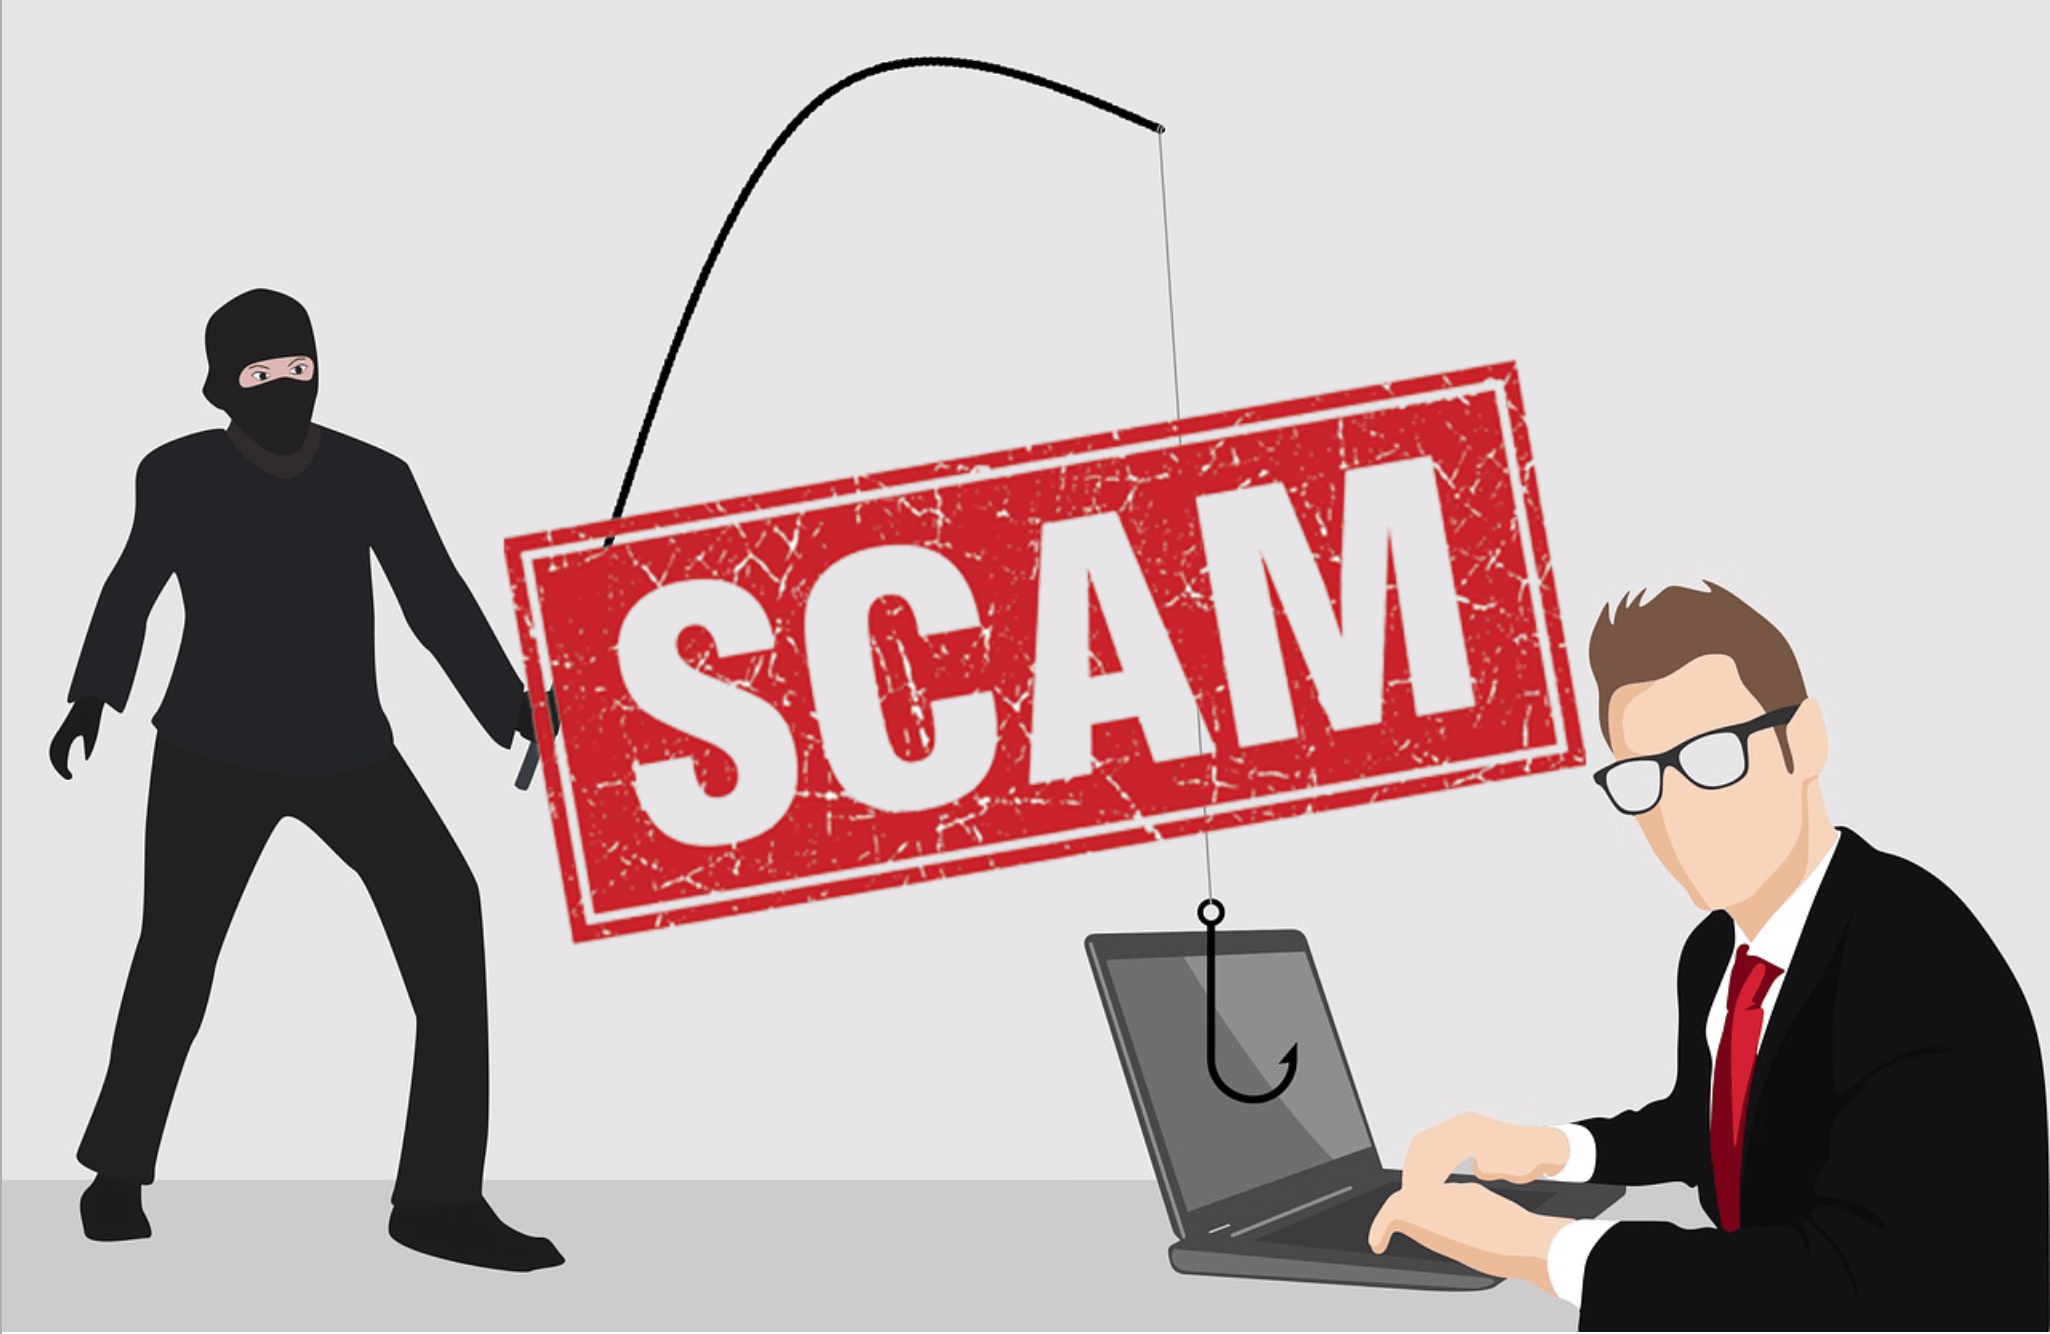 Watch out for These Top Internet Scams | Money Matters